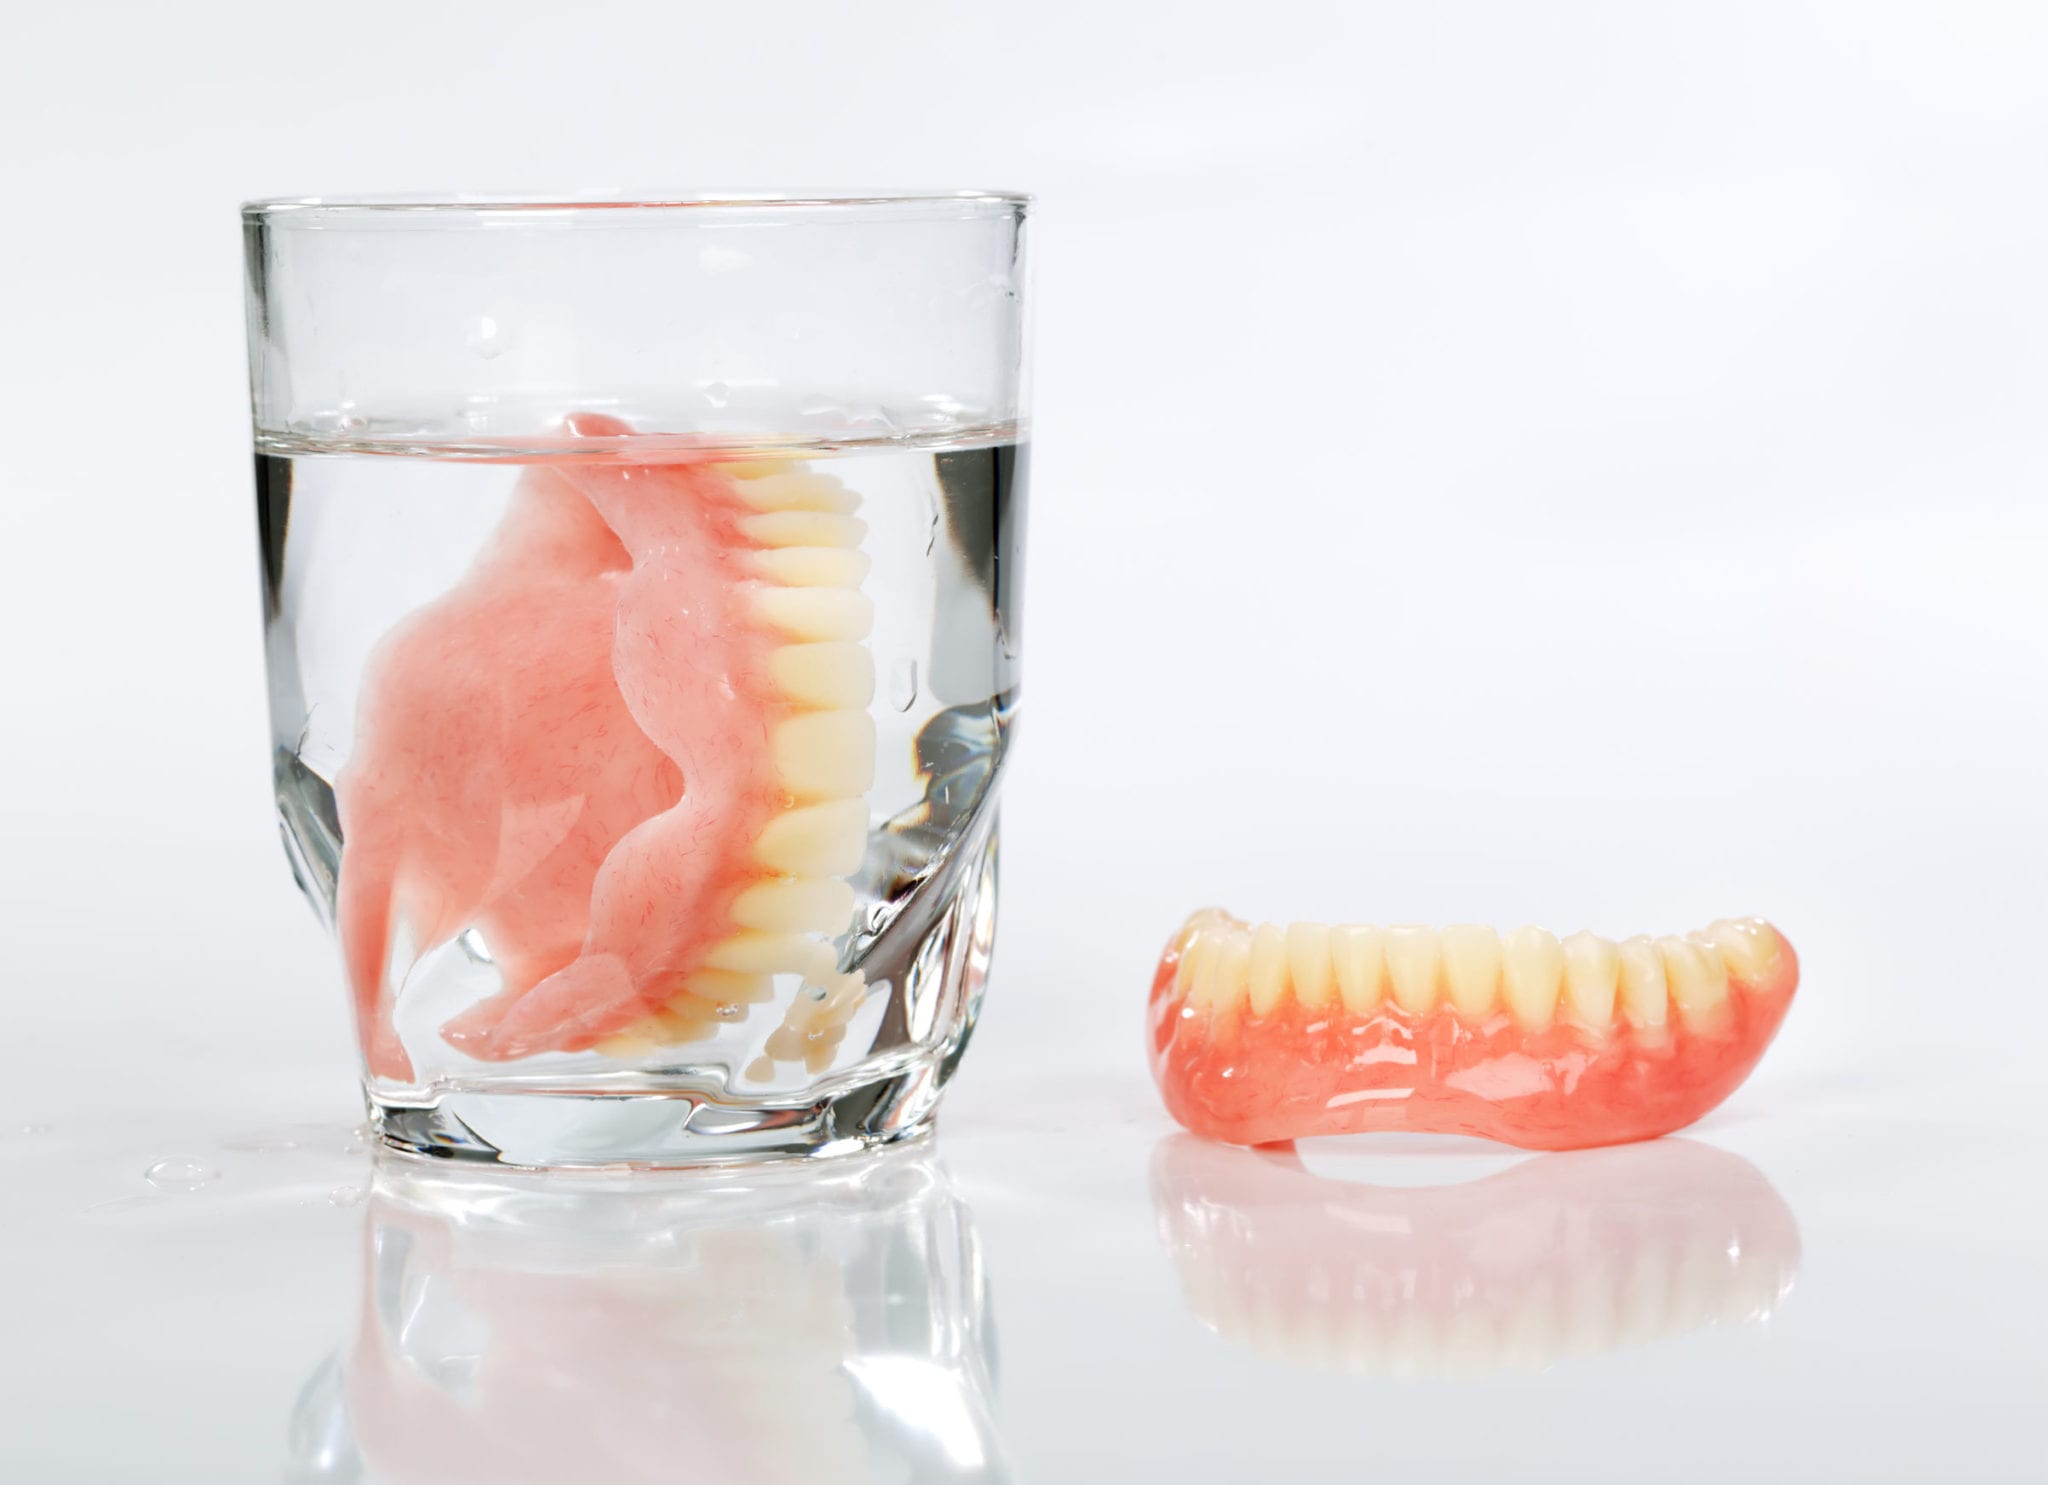 Taking Proper Care of Dentures (and Other Tooth Replacements)